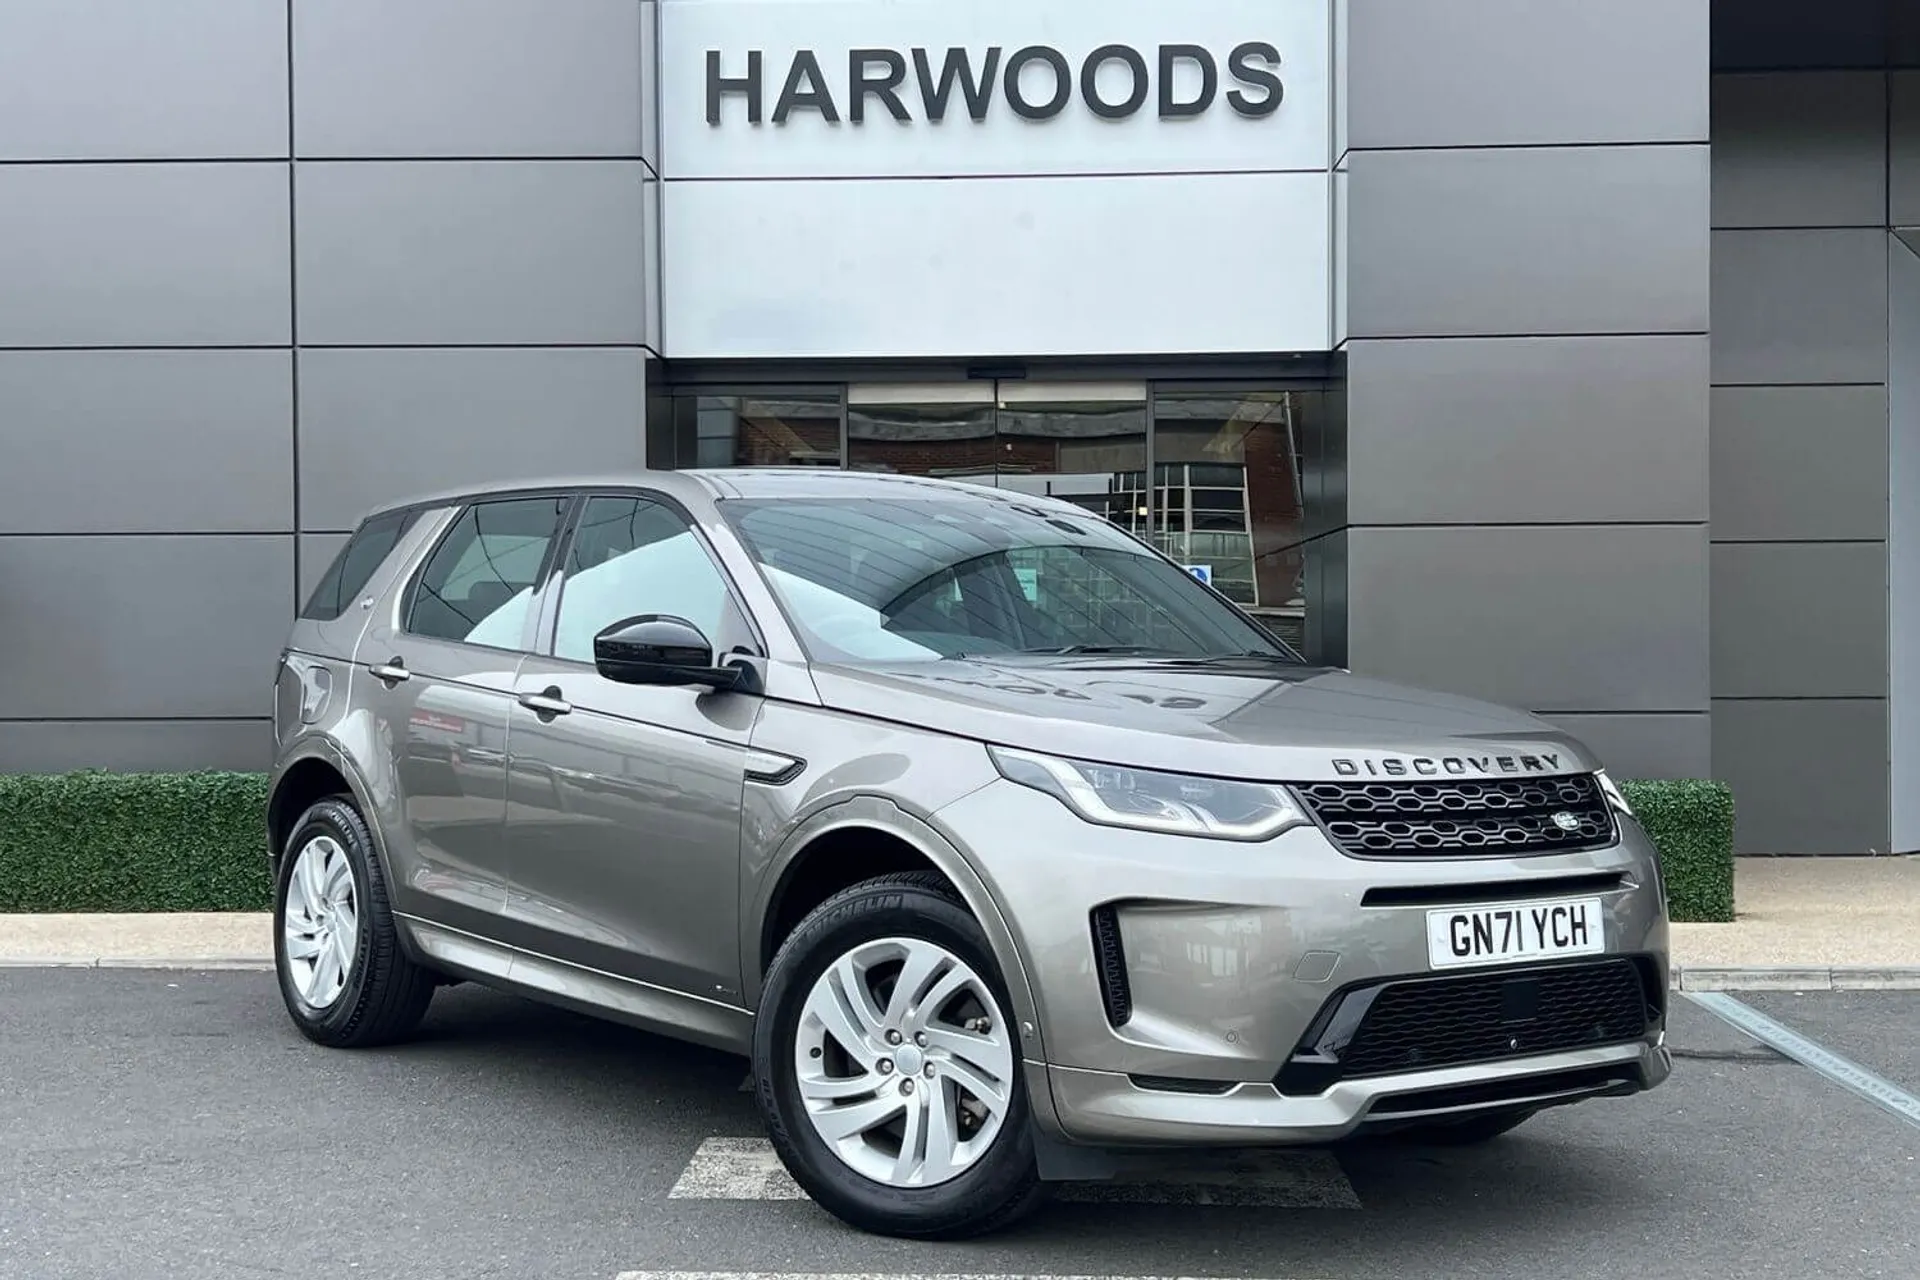 LAND ROVER DISCOVERY SPORT focused image